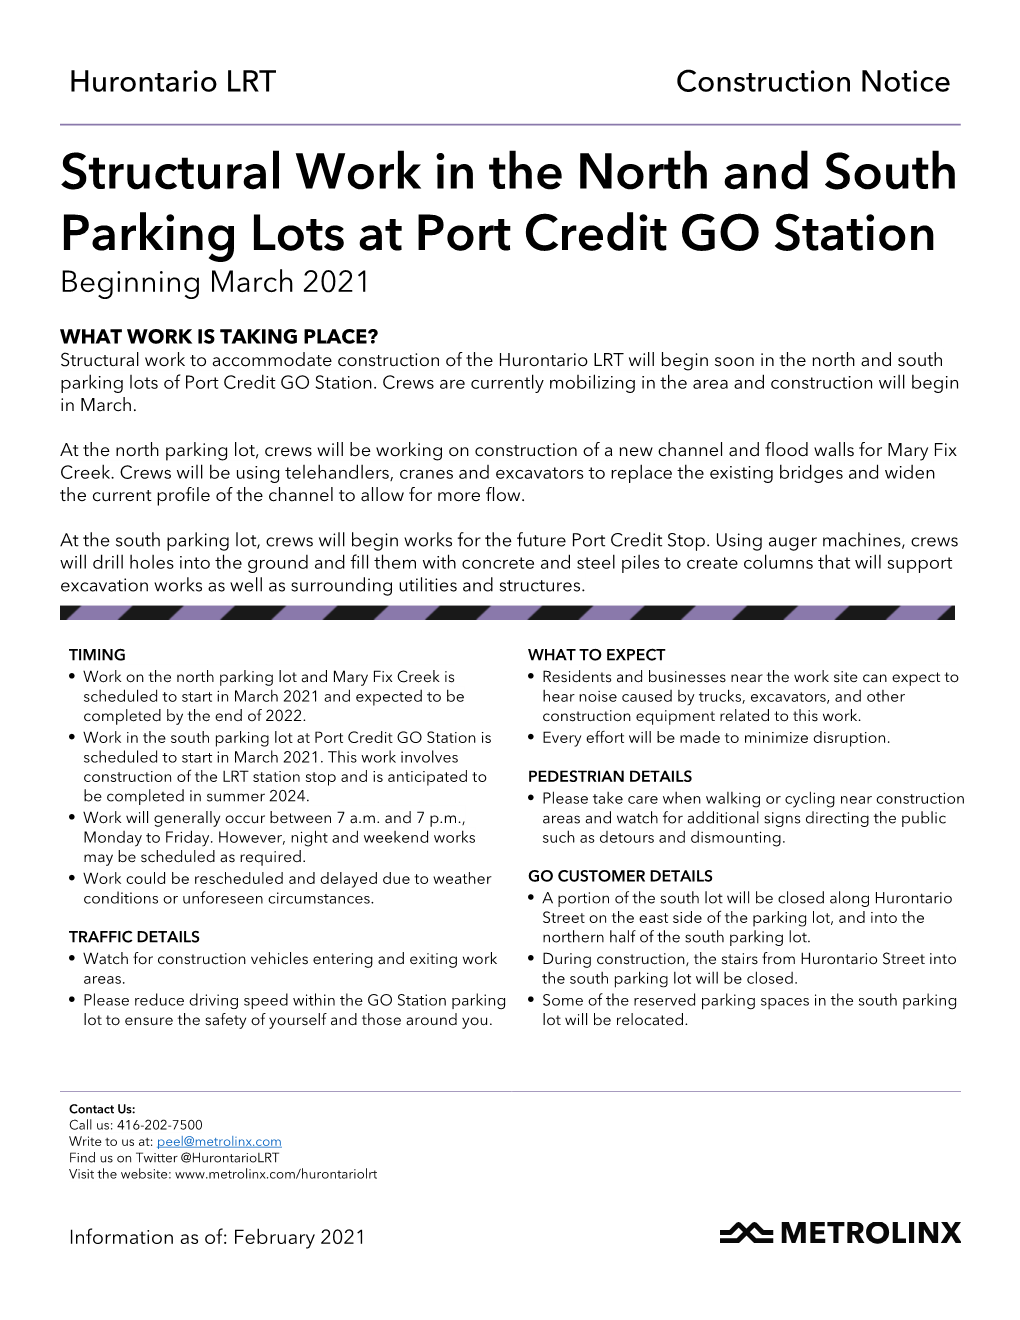 Structural Work in the North and South Parking Lots at Port Credit GO Station Beginning March 2021